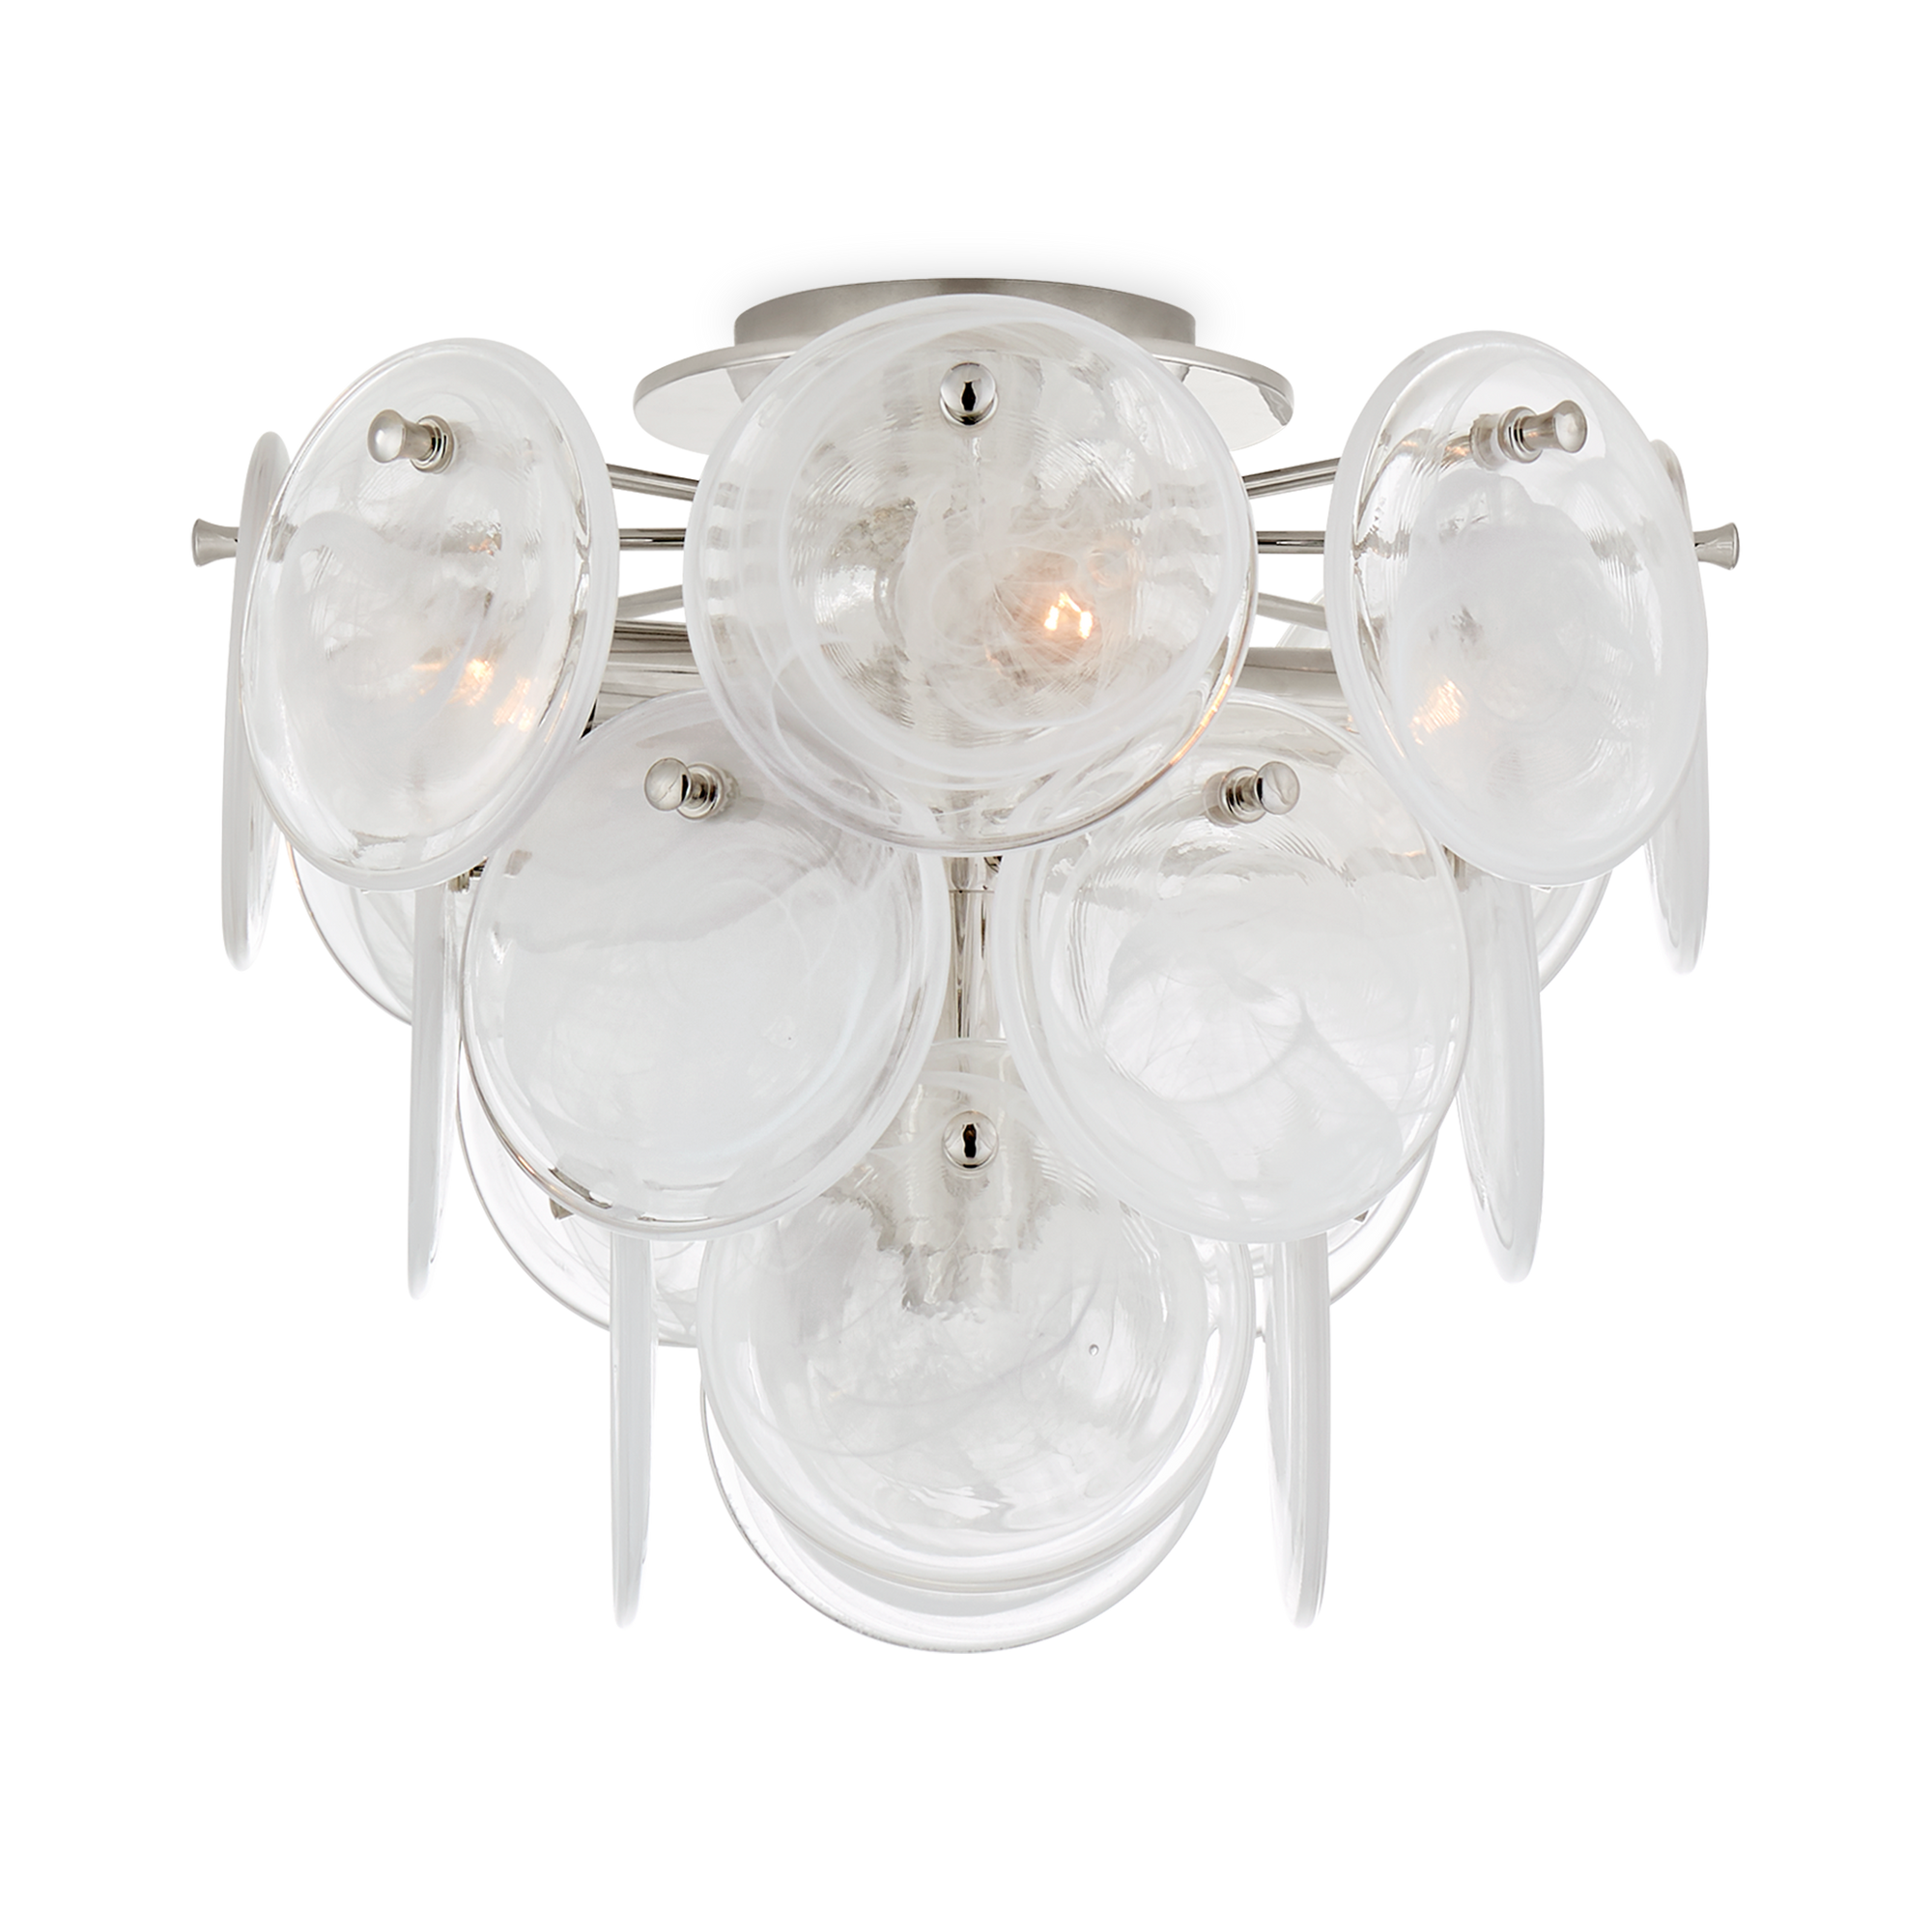 The Loire Medium Tier Flush Mount is inspired by old-world glamour and European midcentury design.